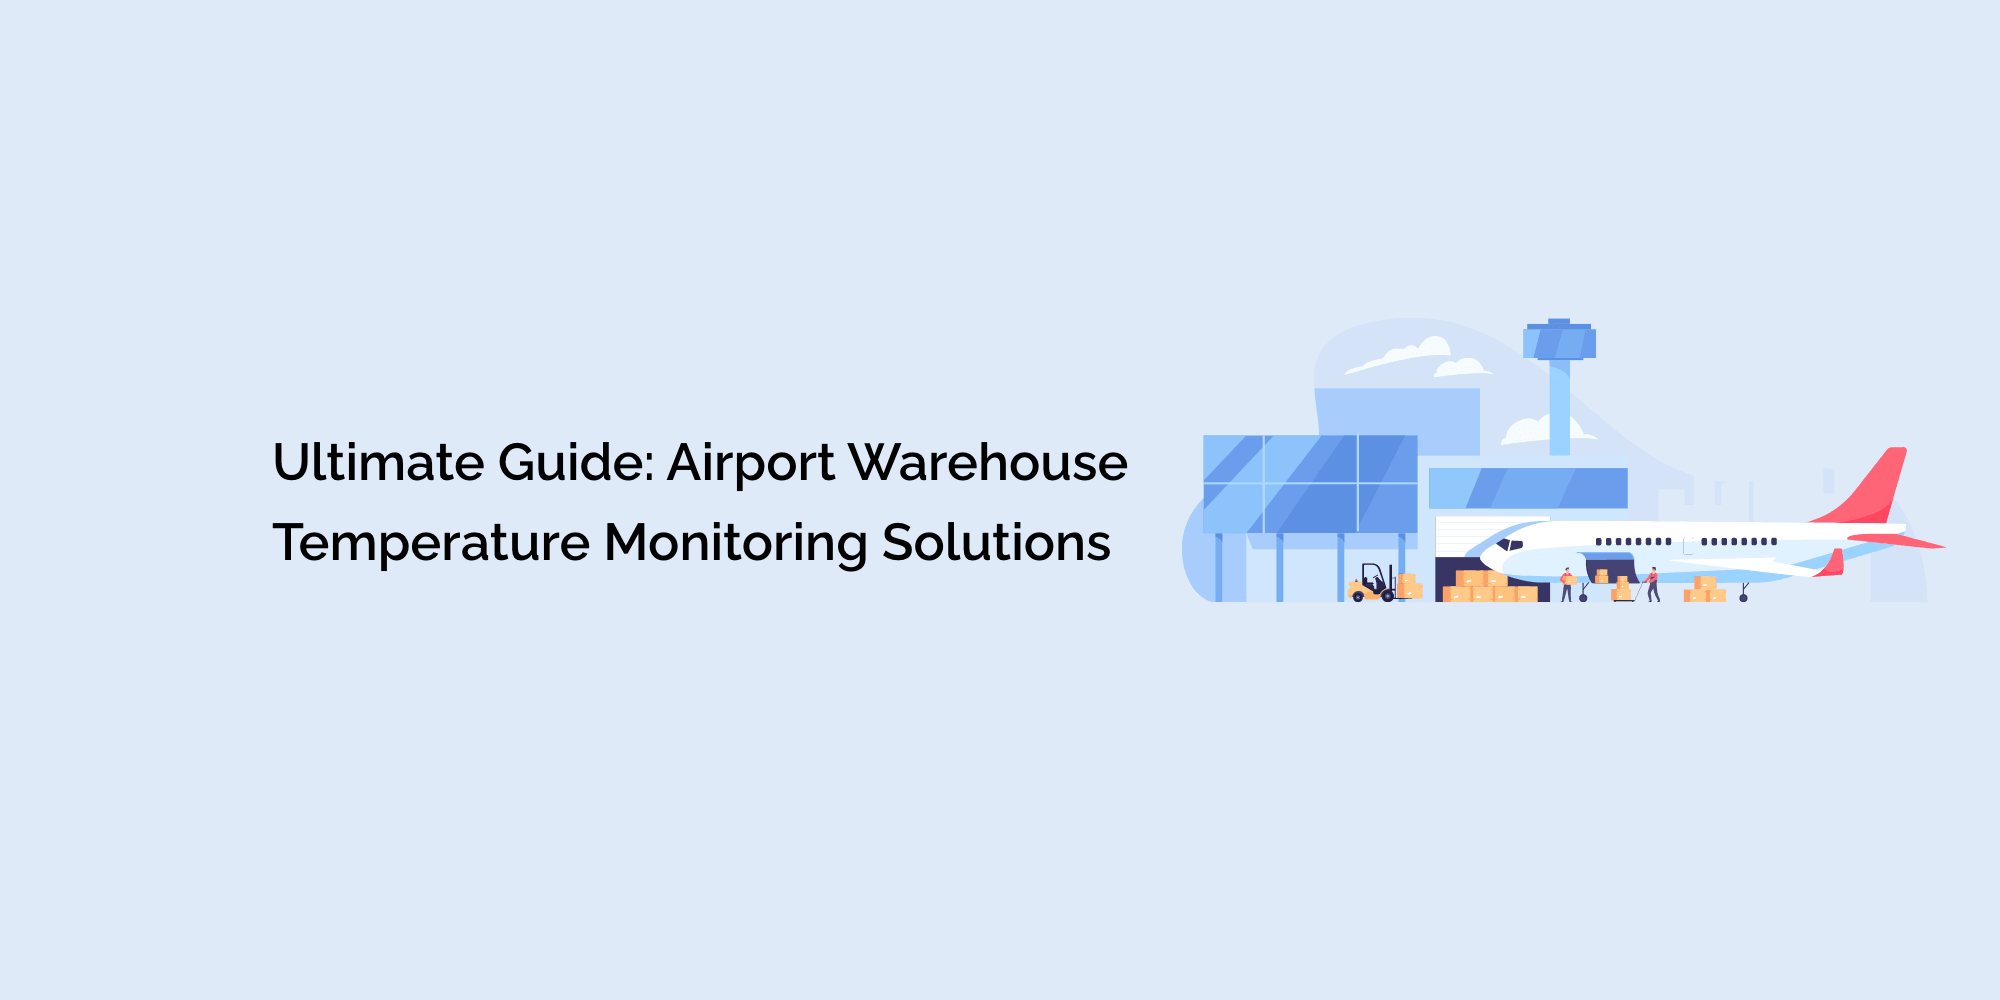 Ultimate Guide: Airport Warehouse Temperature Monitoring Solutions